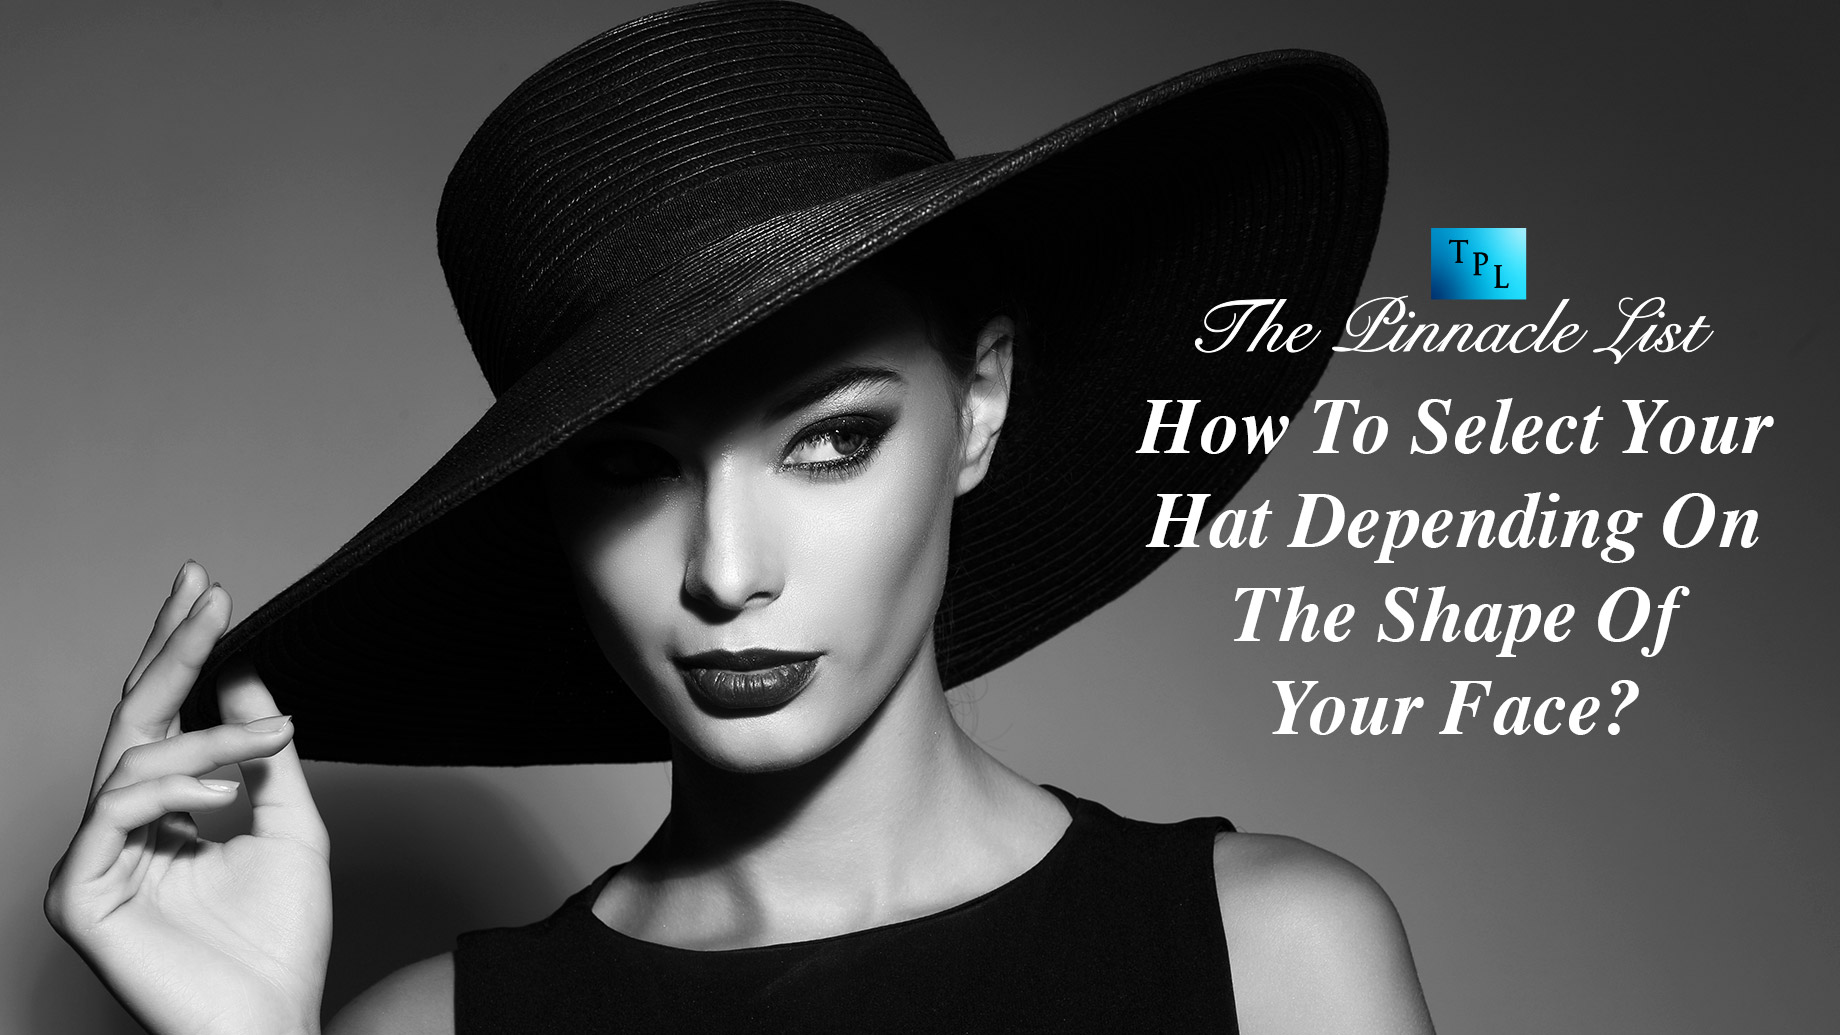 How To Select Your Hat Depending On The Shape Of Your Face?